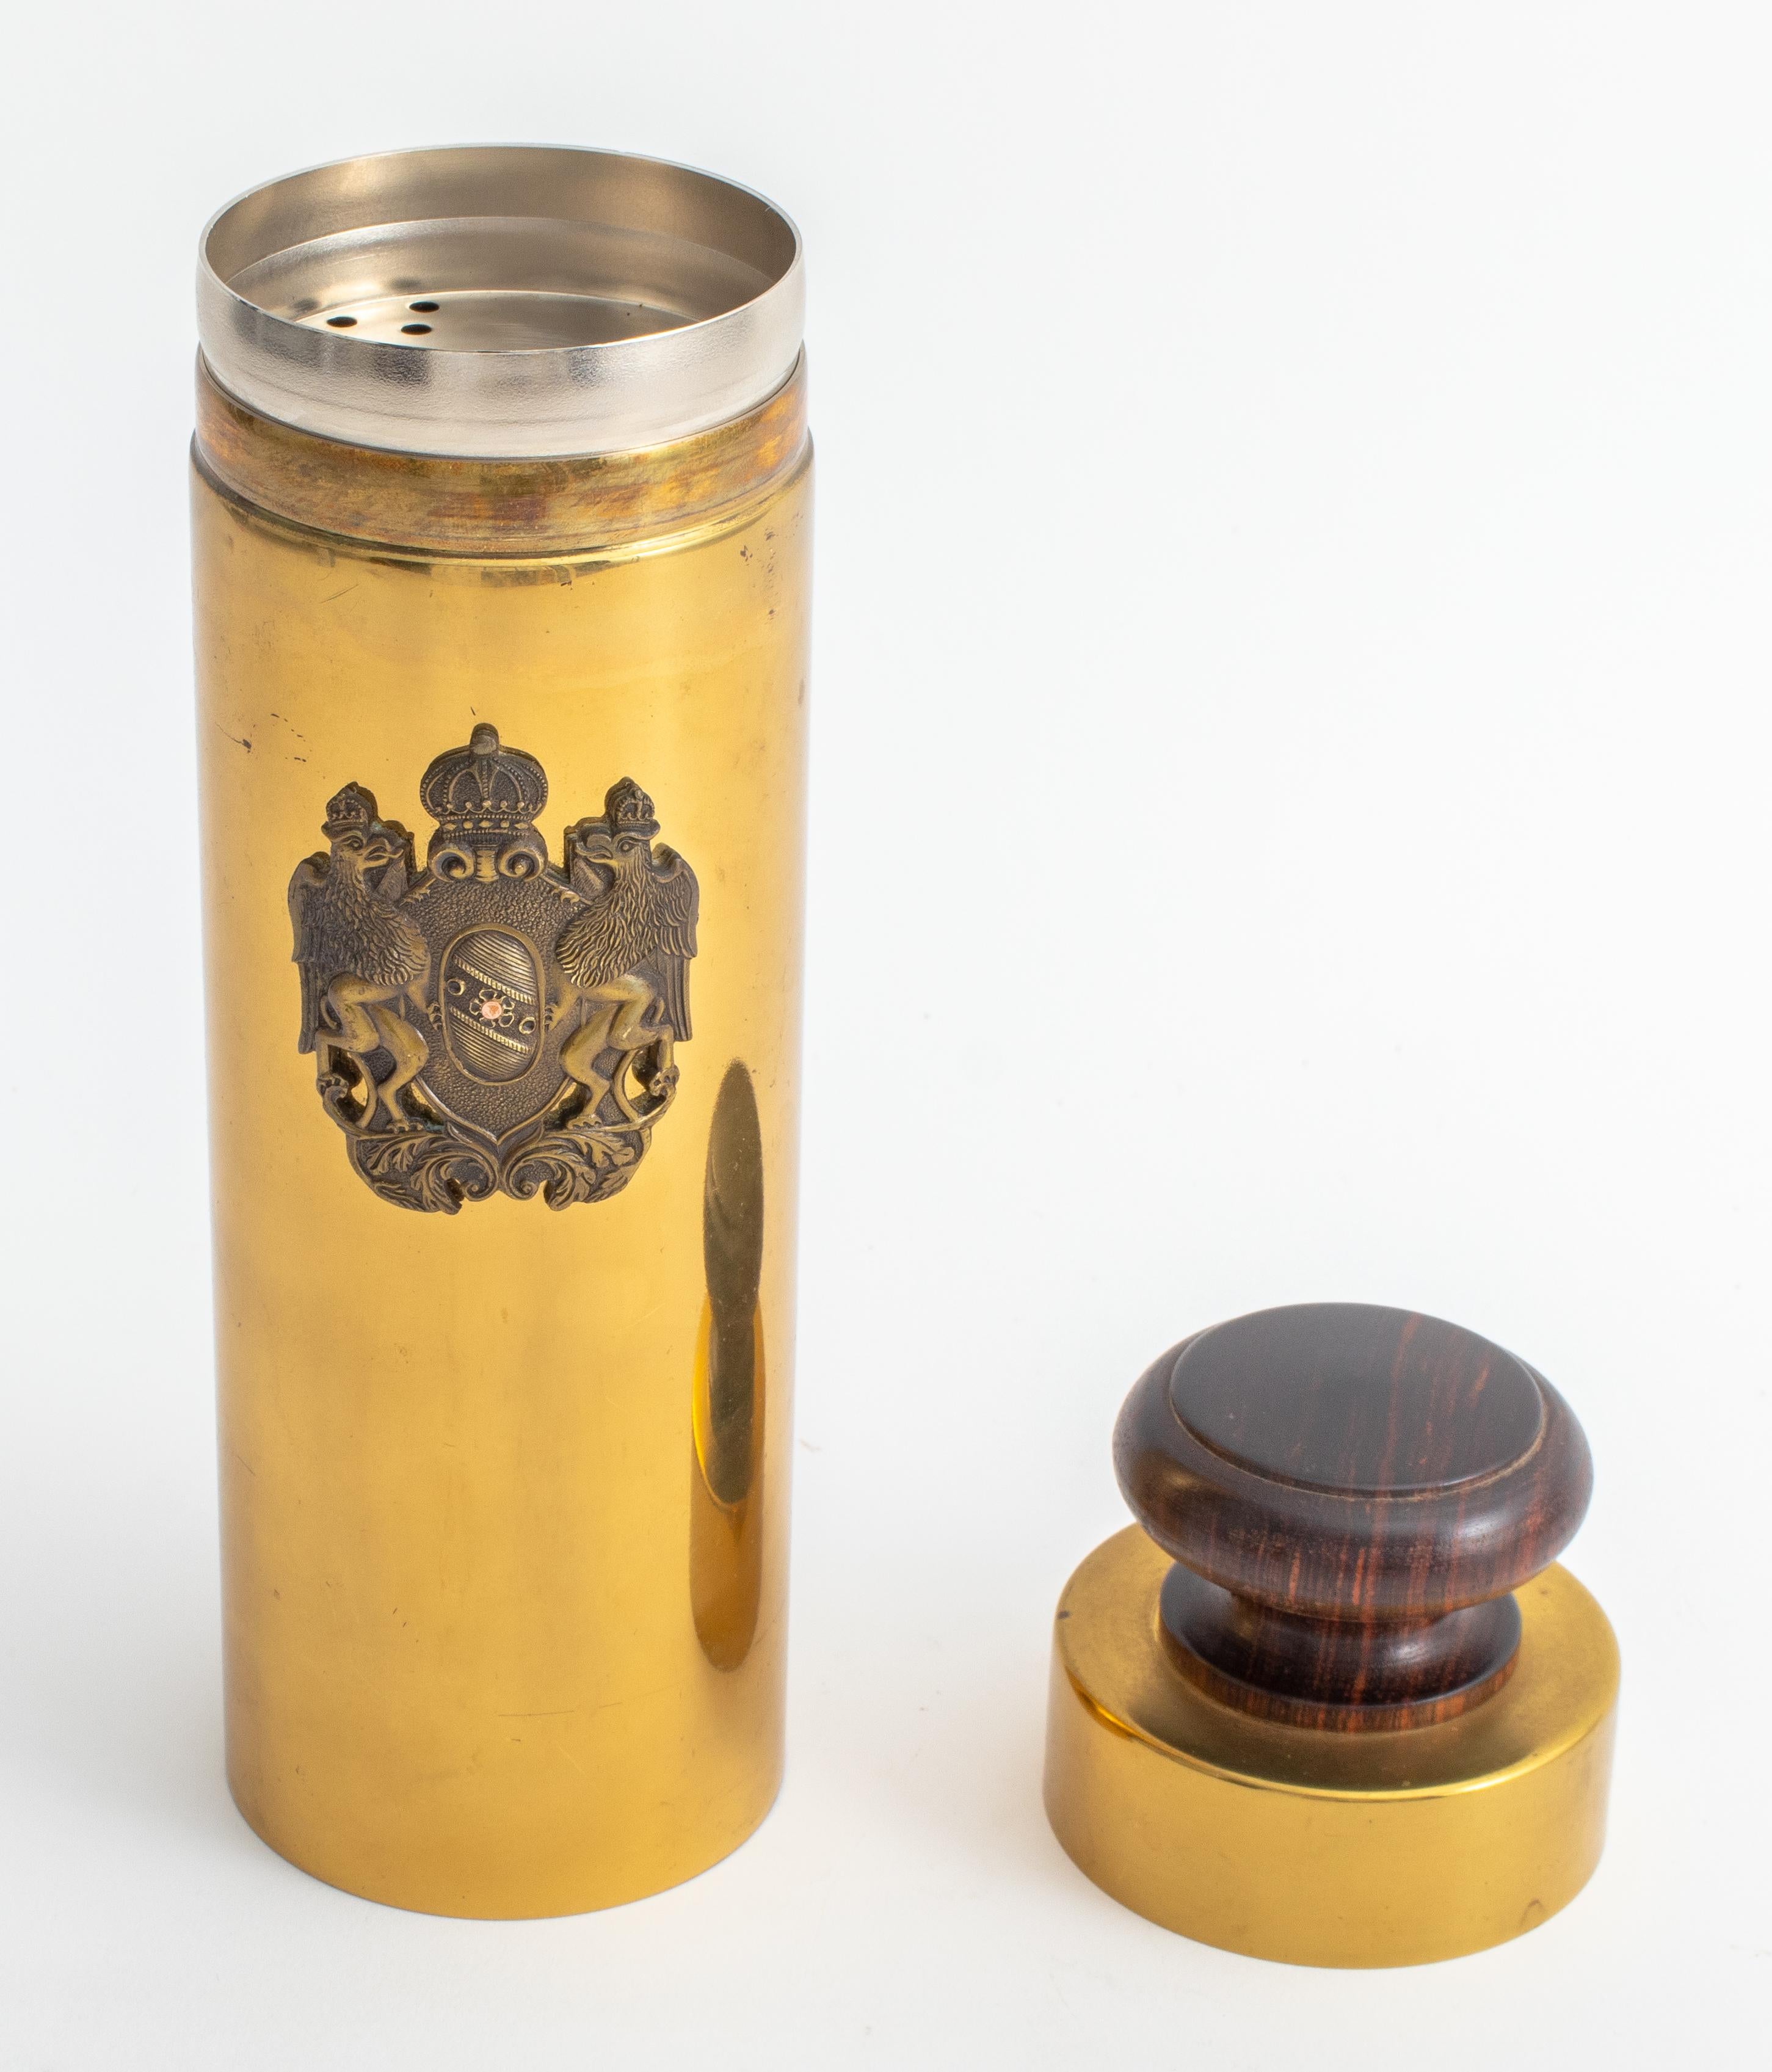 Parazinger high quality brass cocktail shaker. Very good vintage condition. Marked 